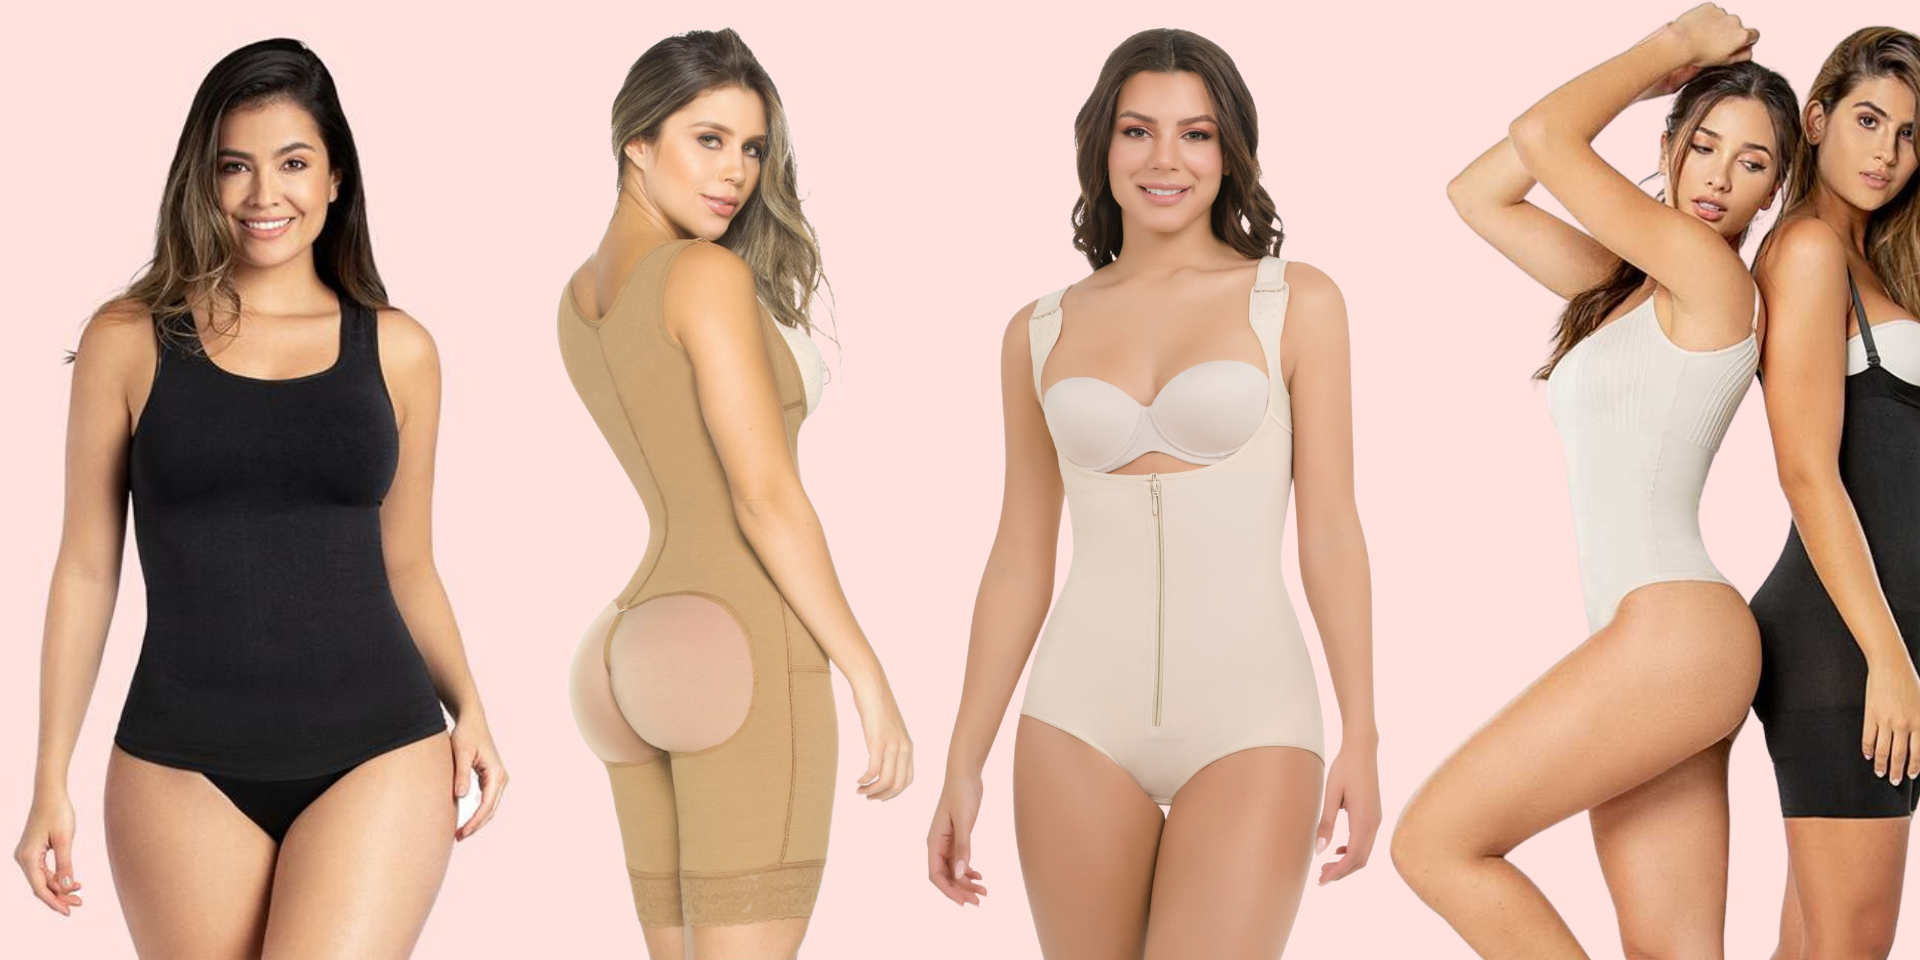 High Control Mid-Thigh Bodysuit - Best for After Surgery Recovery — CYSM  Shapers